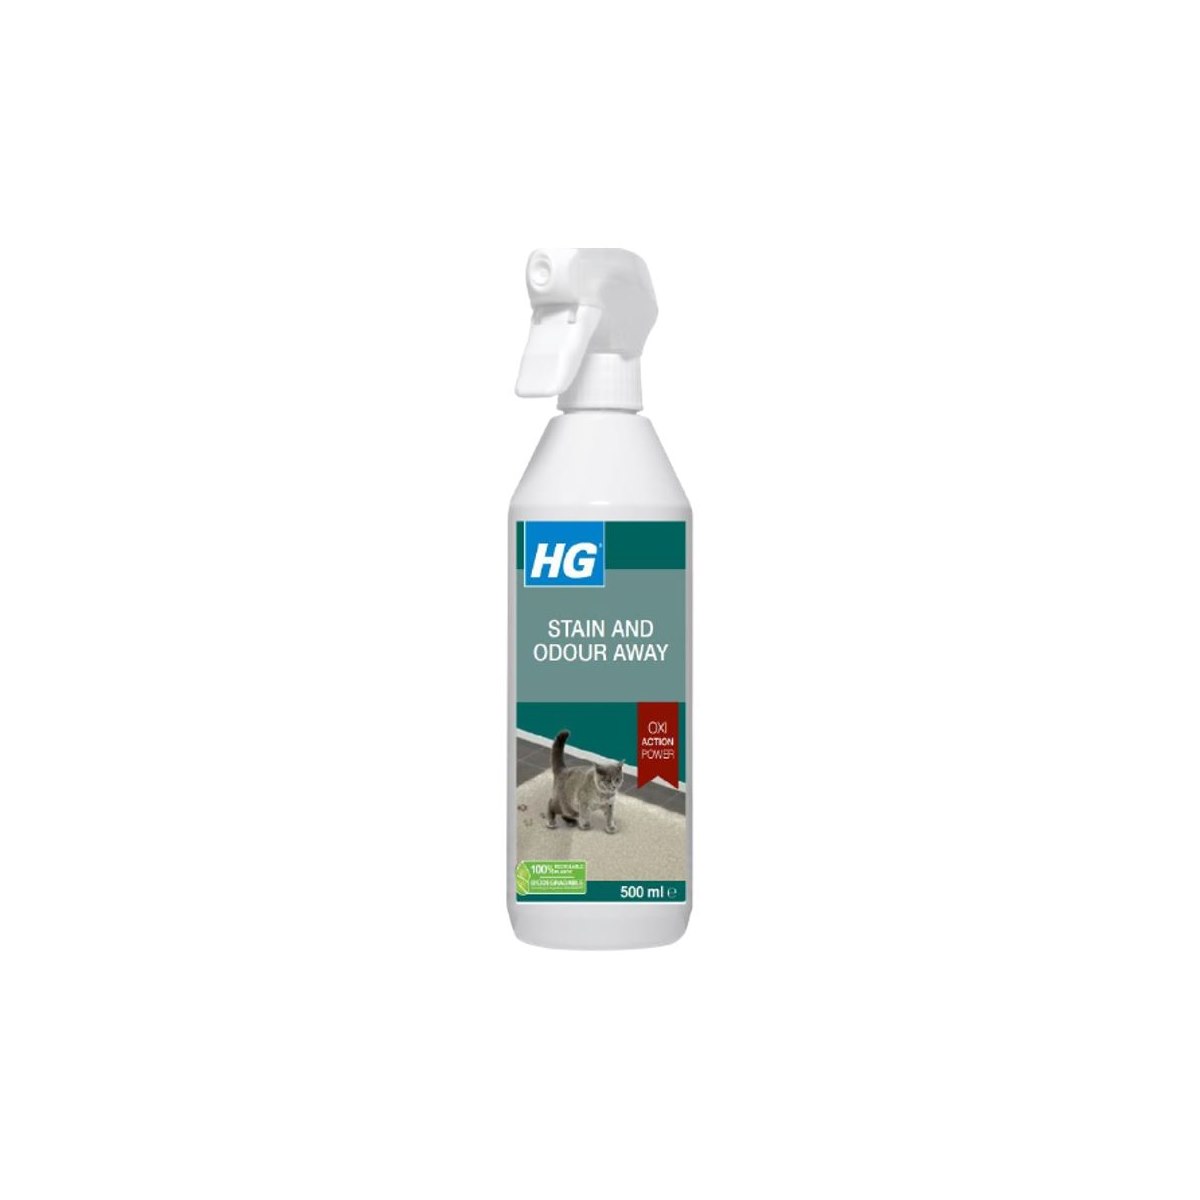 HG Stain and Odour Away 500ml